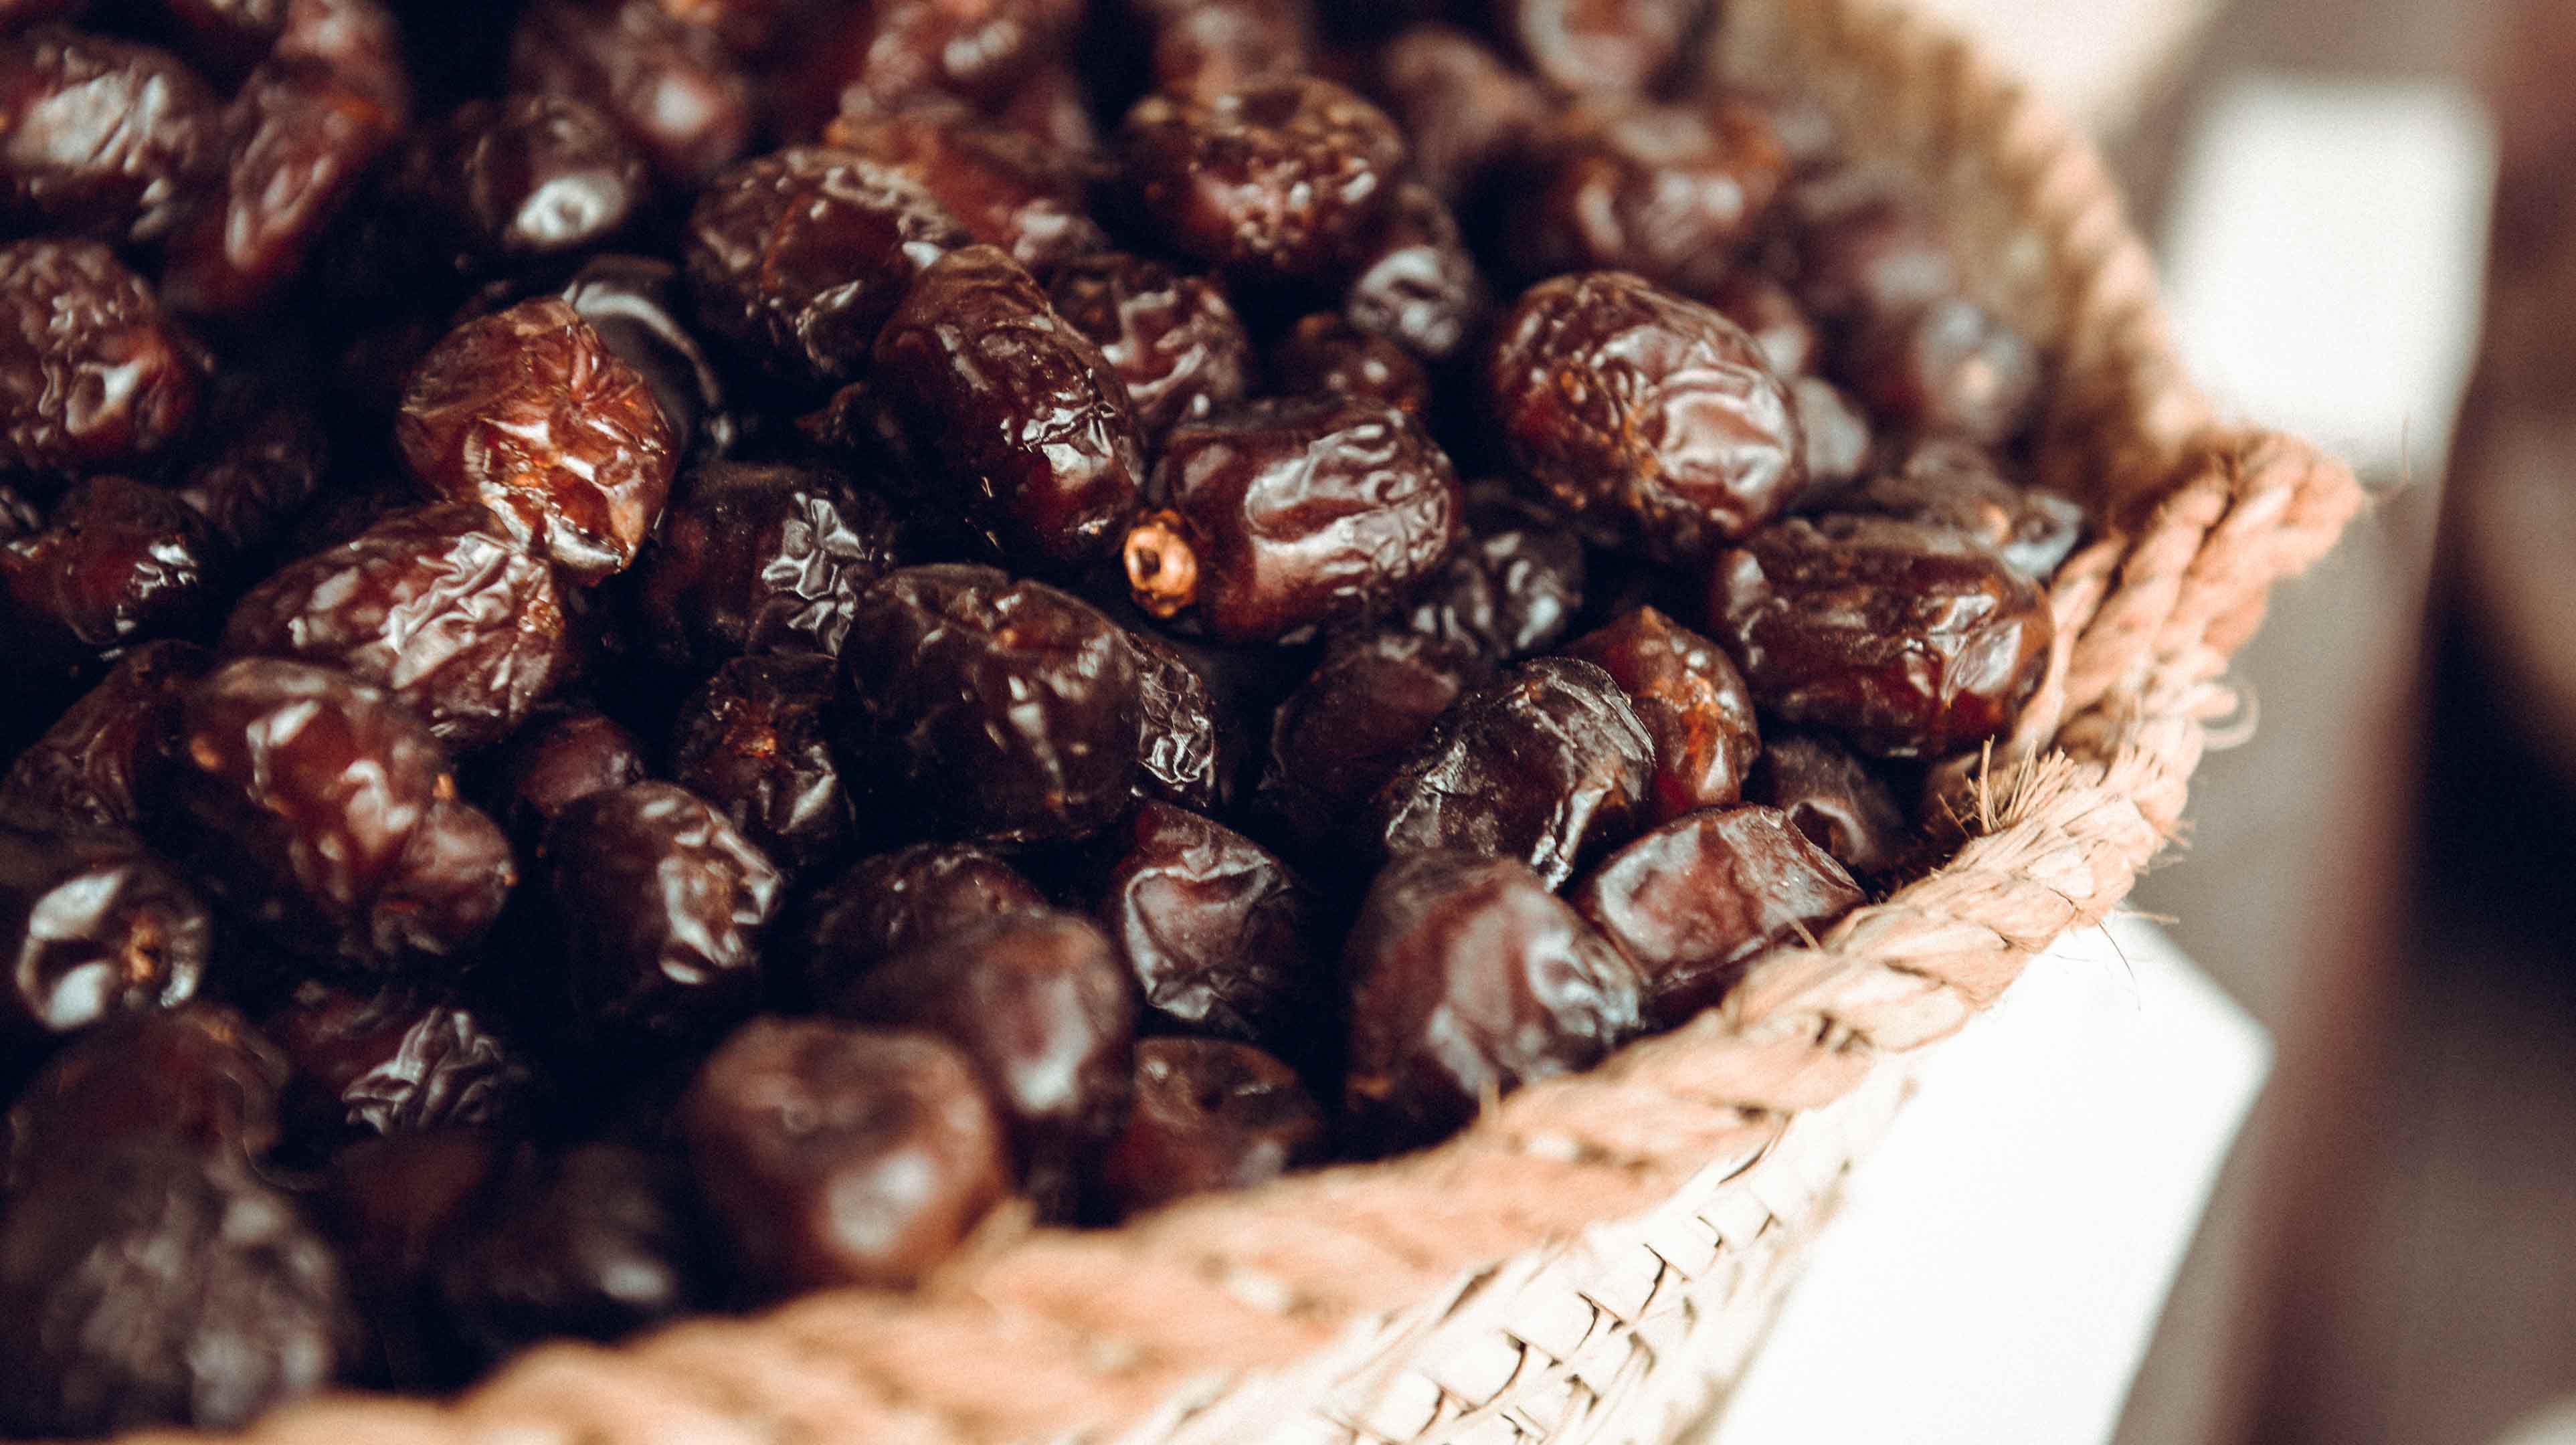 Dark brown dates in a wicker basket to be served with coffee as part of Emirati traditions